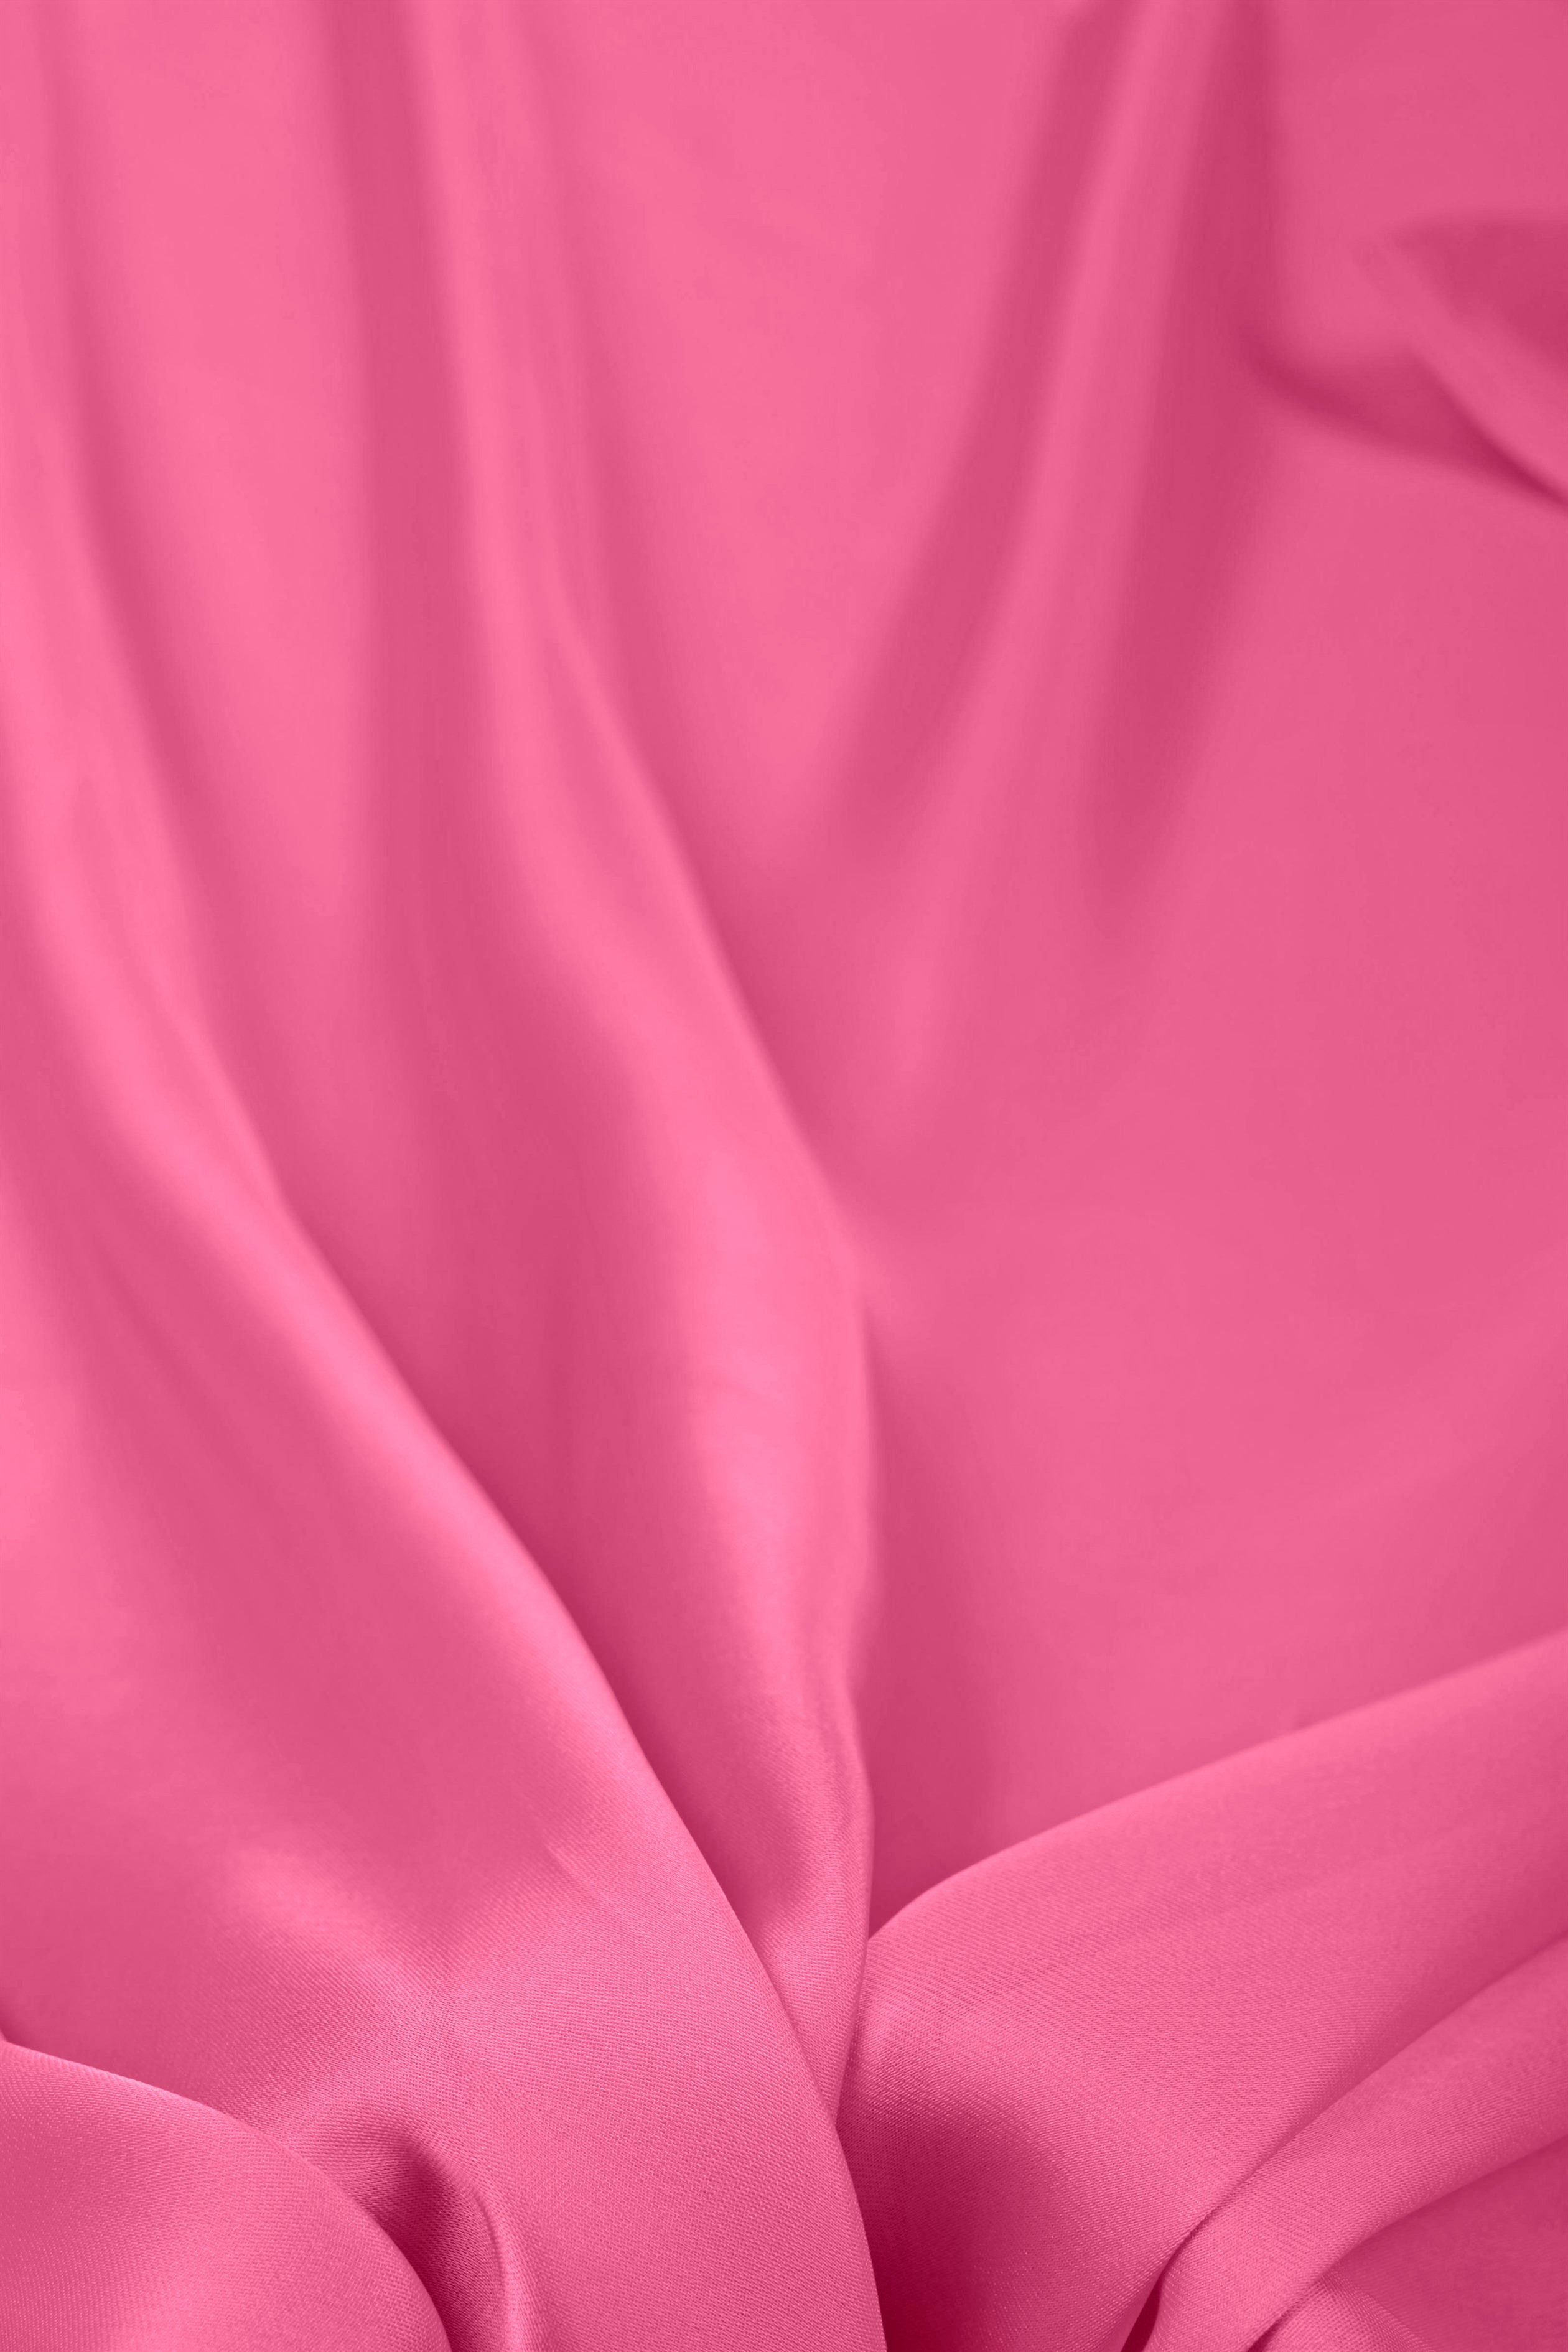 Light Pink Plain Dyed Satin Georgette Fabric